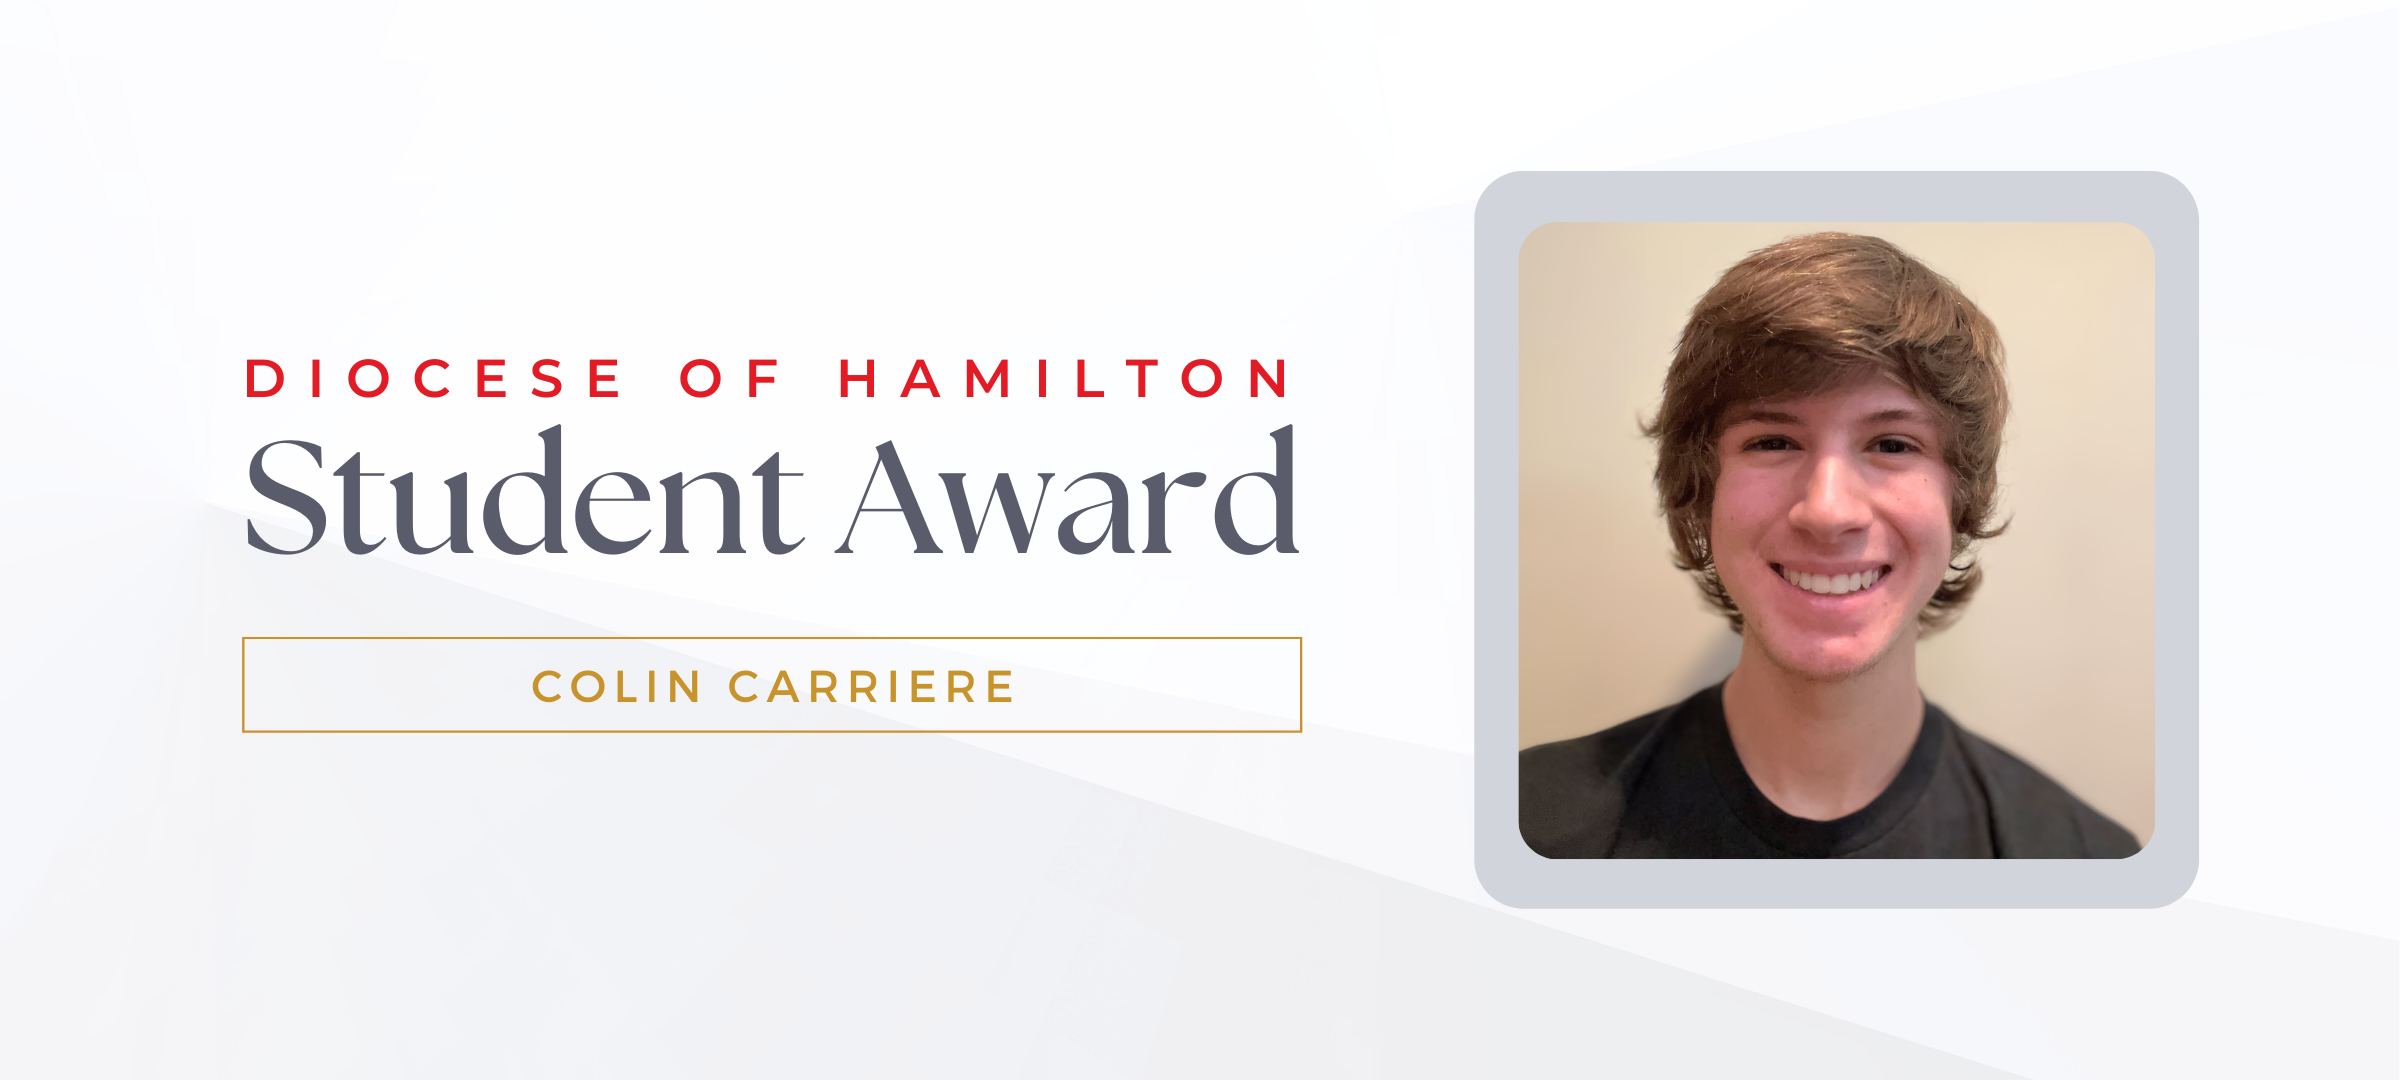 Diocese of Hamilton Student Award - Colin Carriere